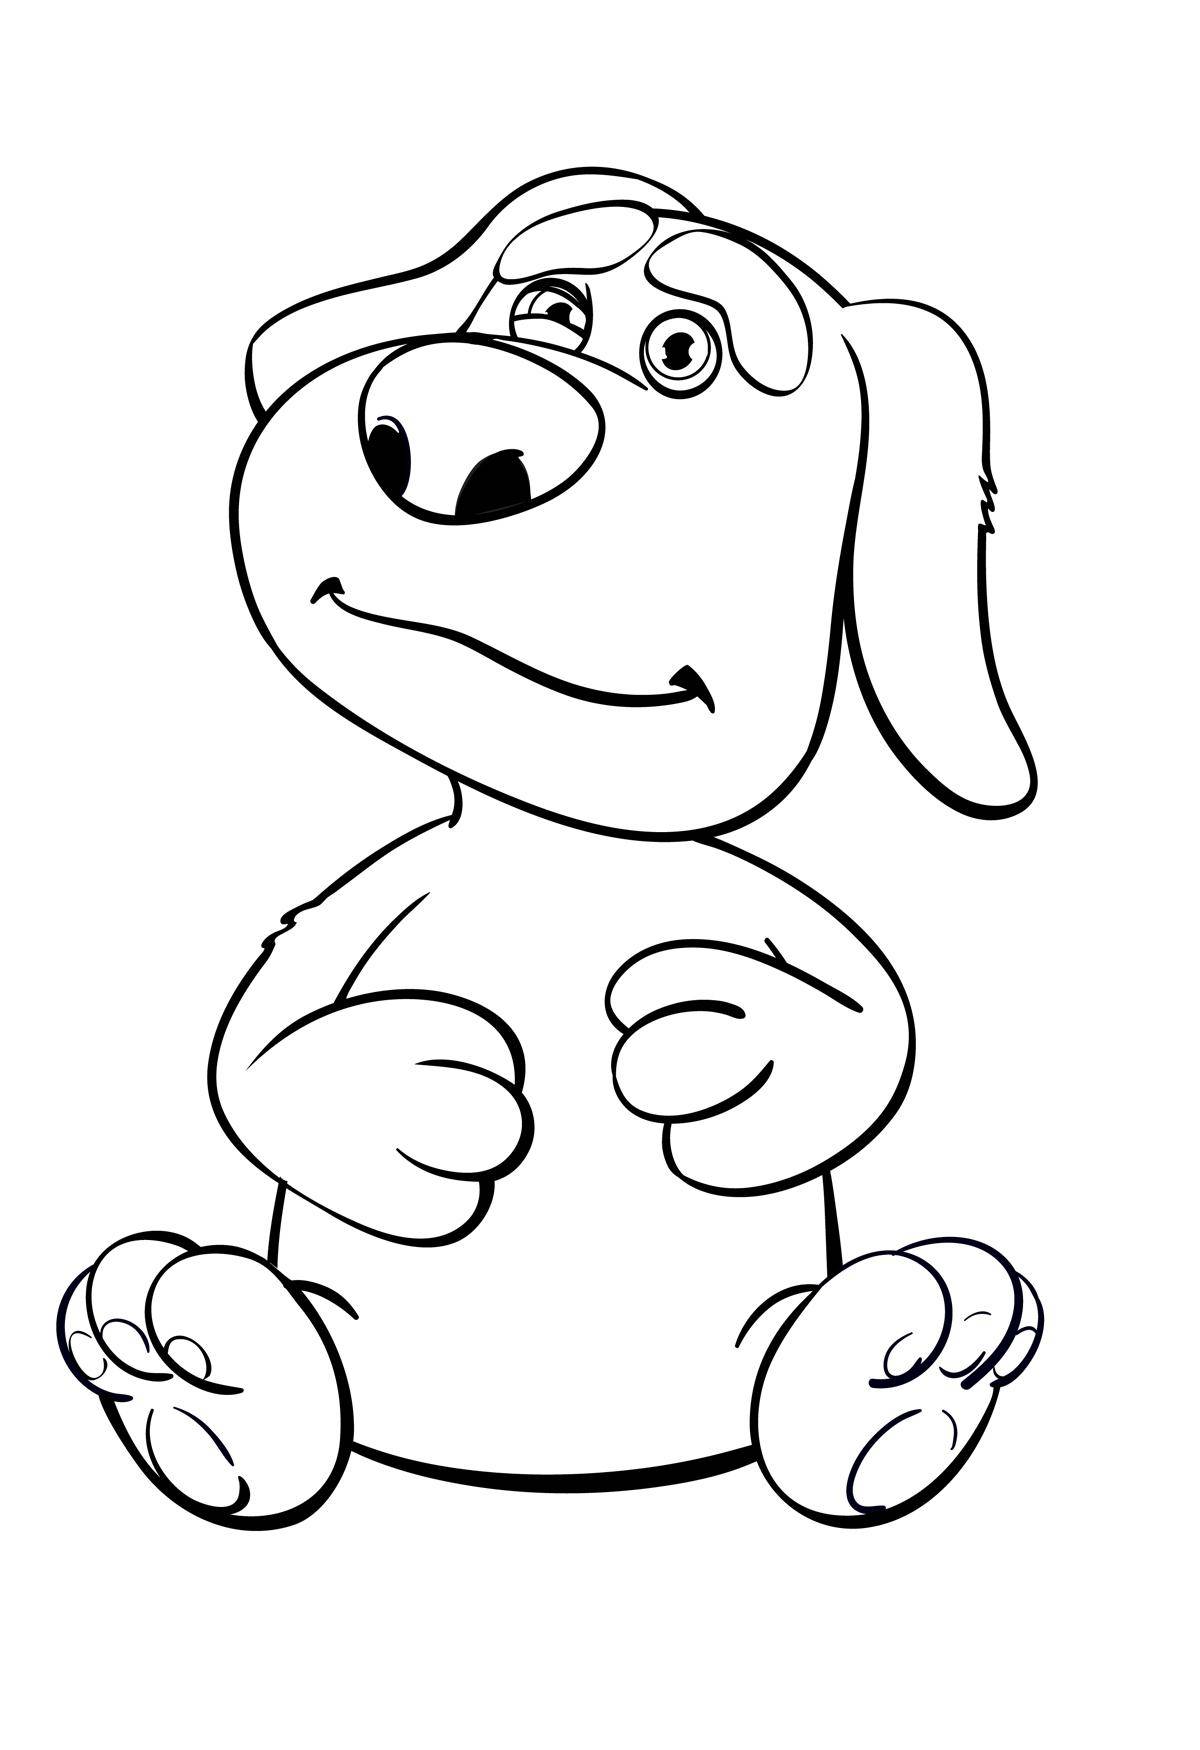 Coloring Dog Ben. Category coloring. Tags:  games, Tom, Ben, dog.